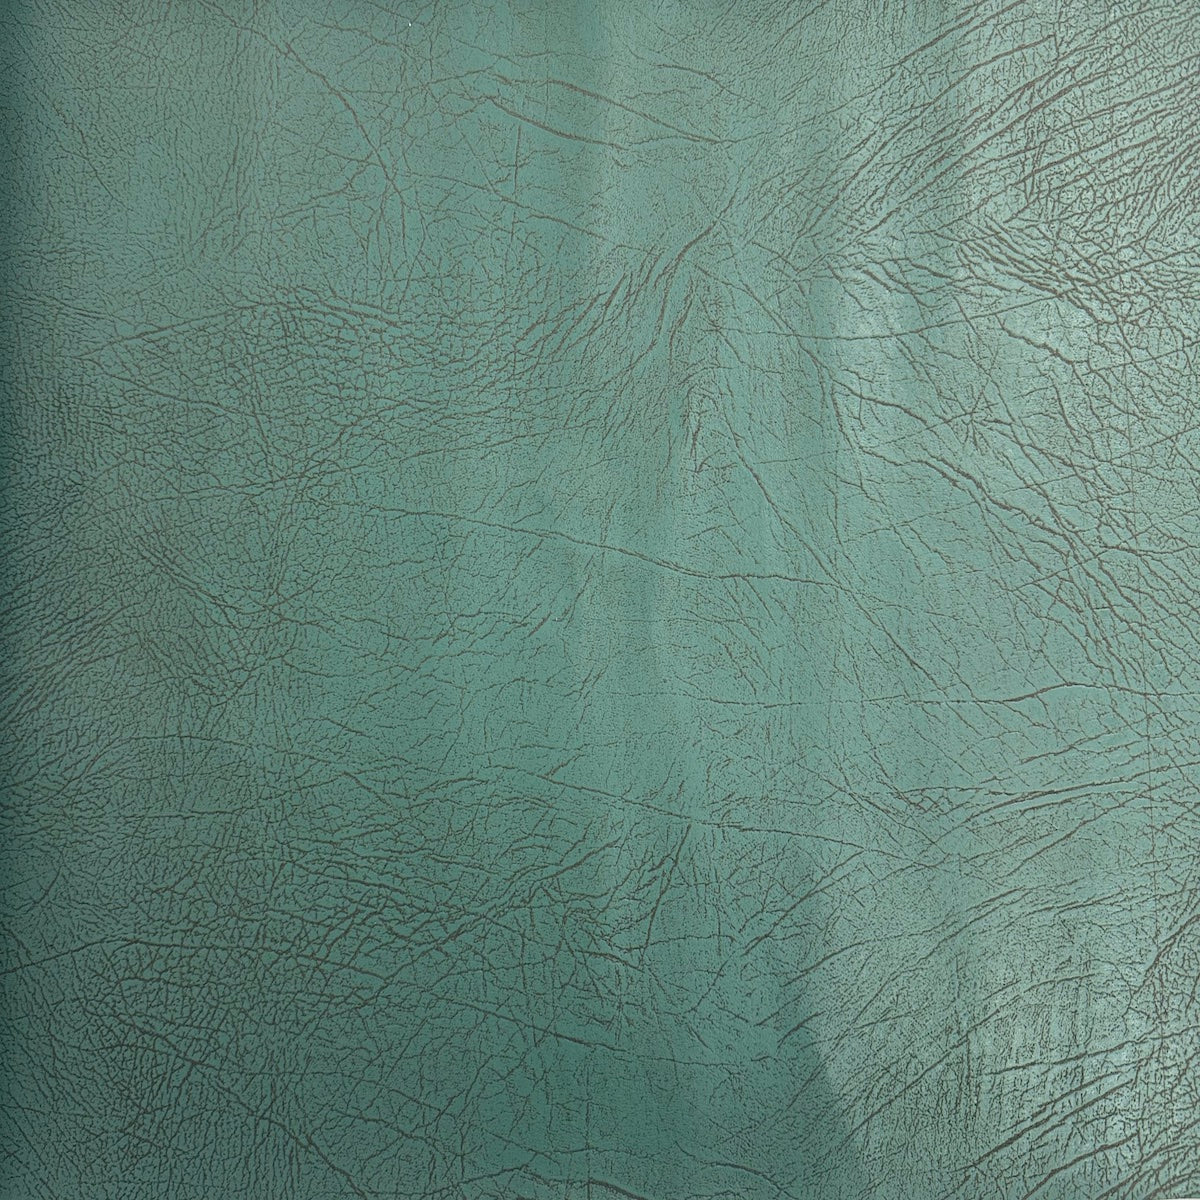 Turquoise Blue Vintage Distressed Faux Leather Suede Vinyl Fabric